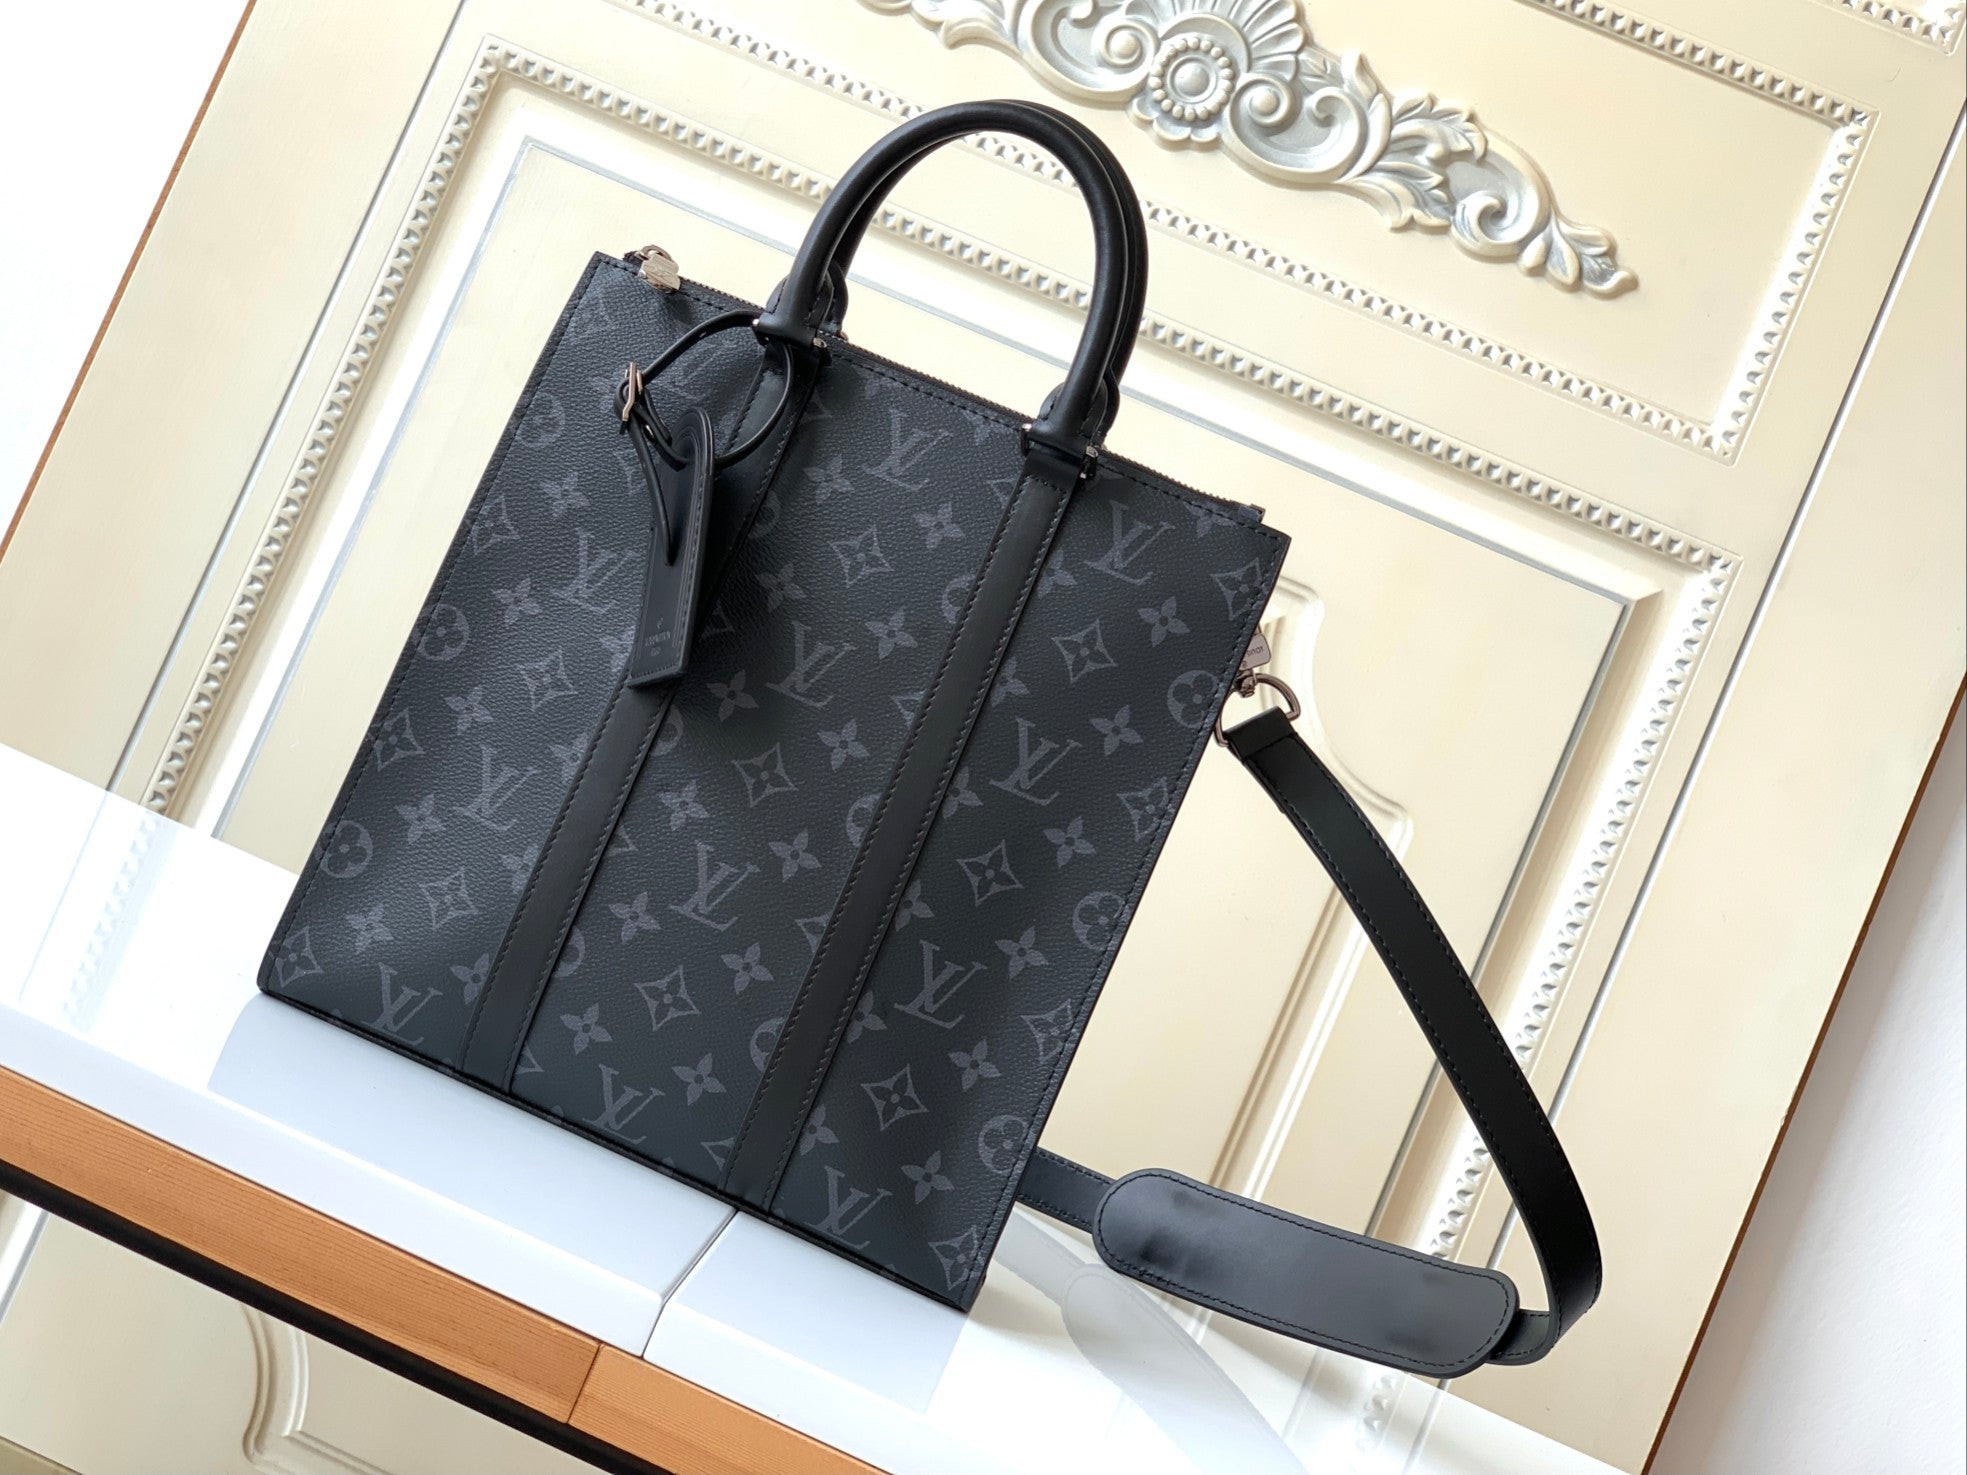 Louis Vuitton Sac Plat XS Bag In Blue And White Leather - Praise